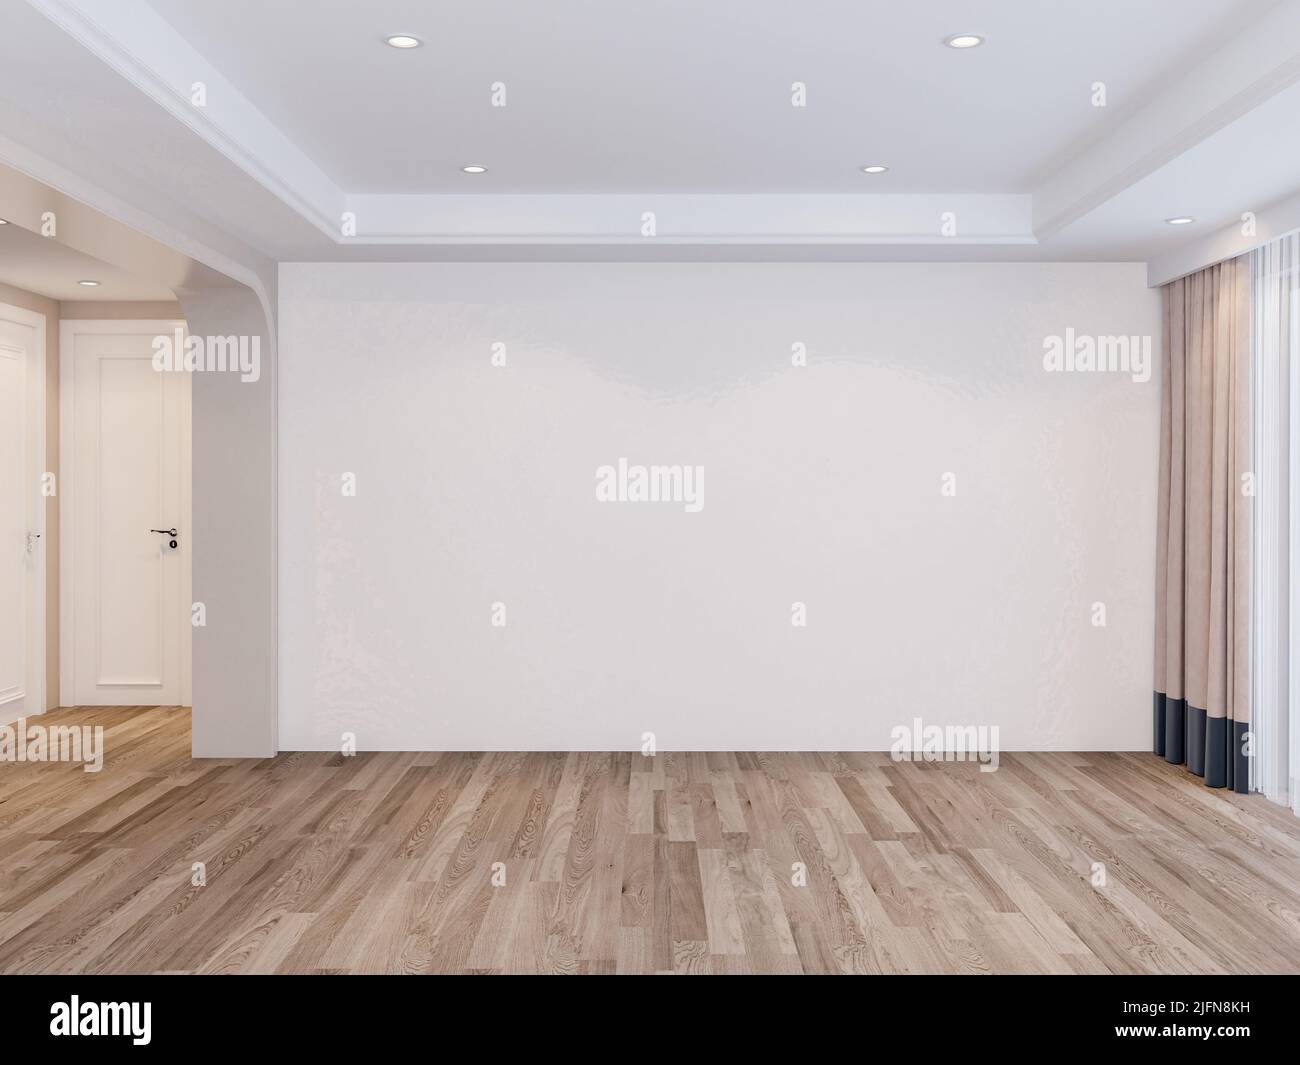 Blank white interior room Wall mockup background,empty white walls corner and white wood floor contemporary,3D rendering Stock Photo